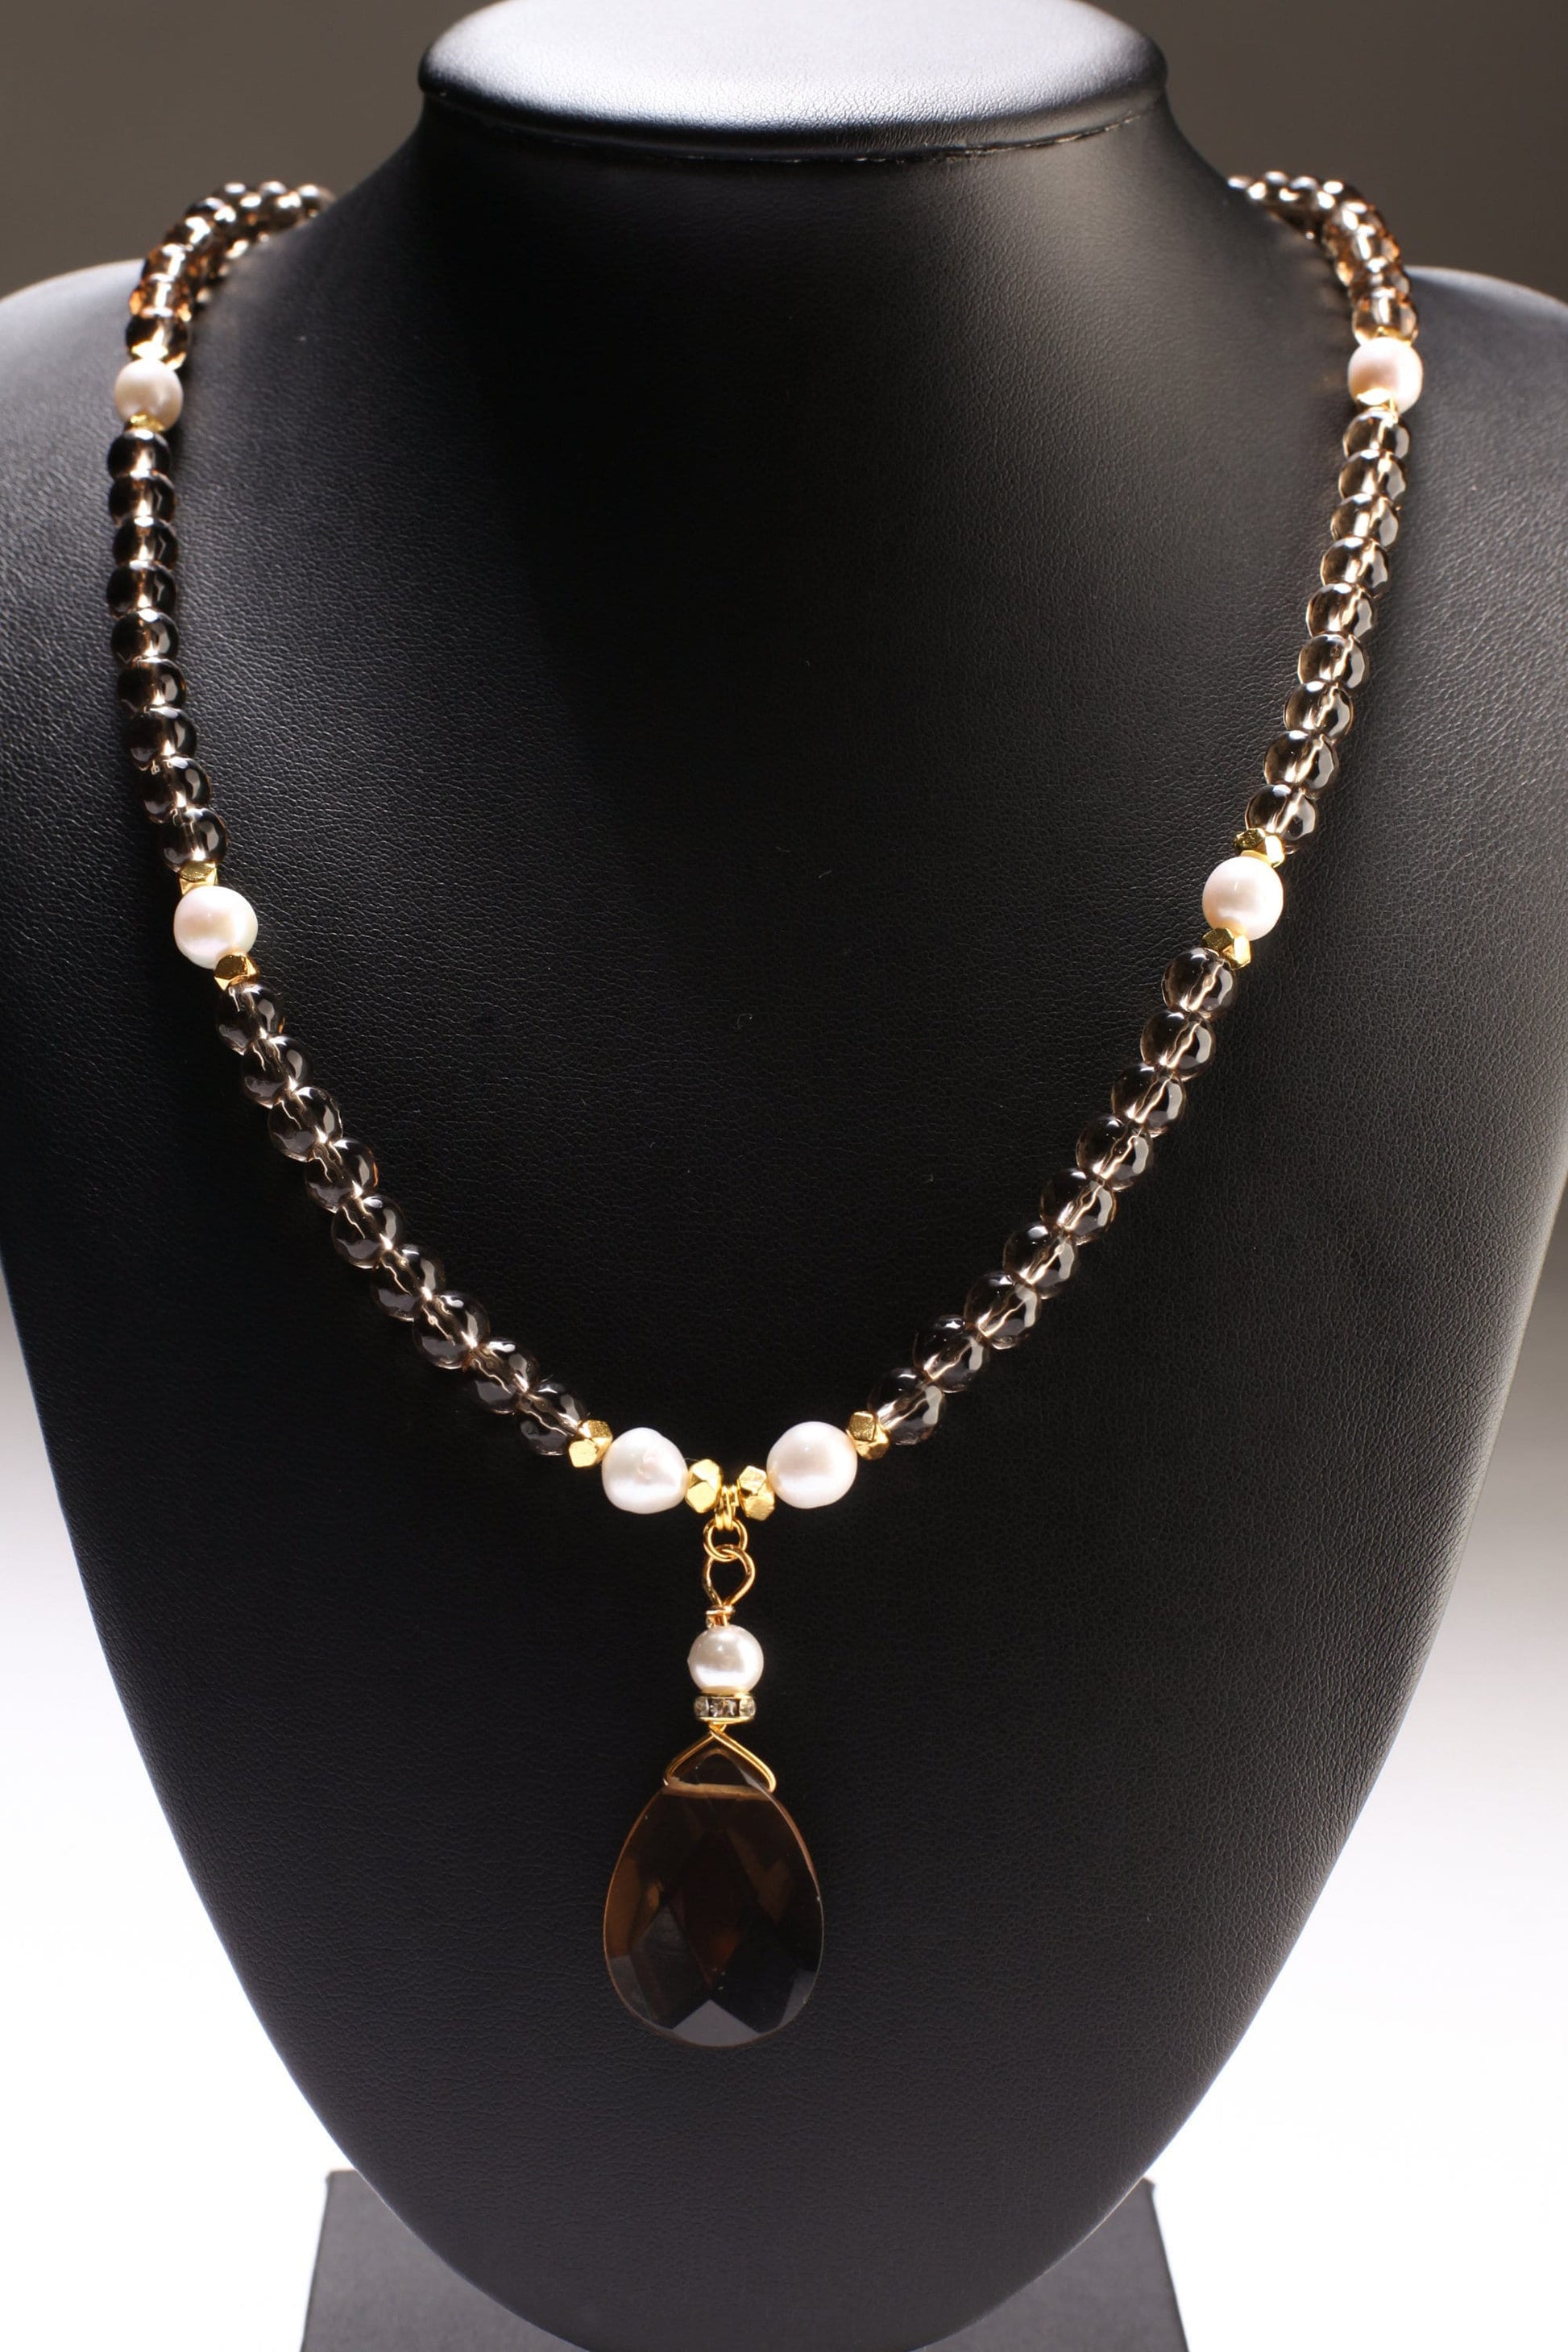 Genuine Smokey Quartz Faceted Pear Drop 18x25mm Pendant, Freshwater 7mm Pearl, Smokey Qz 6mm faceted bead, 19&quot; Necklace with 1.5&quot; Extension